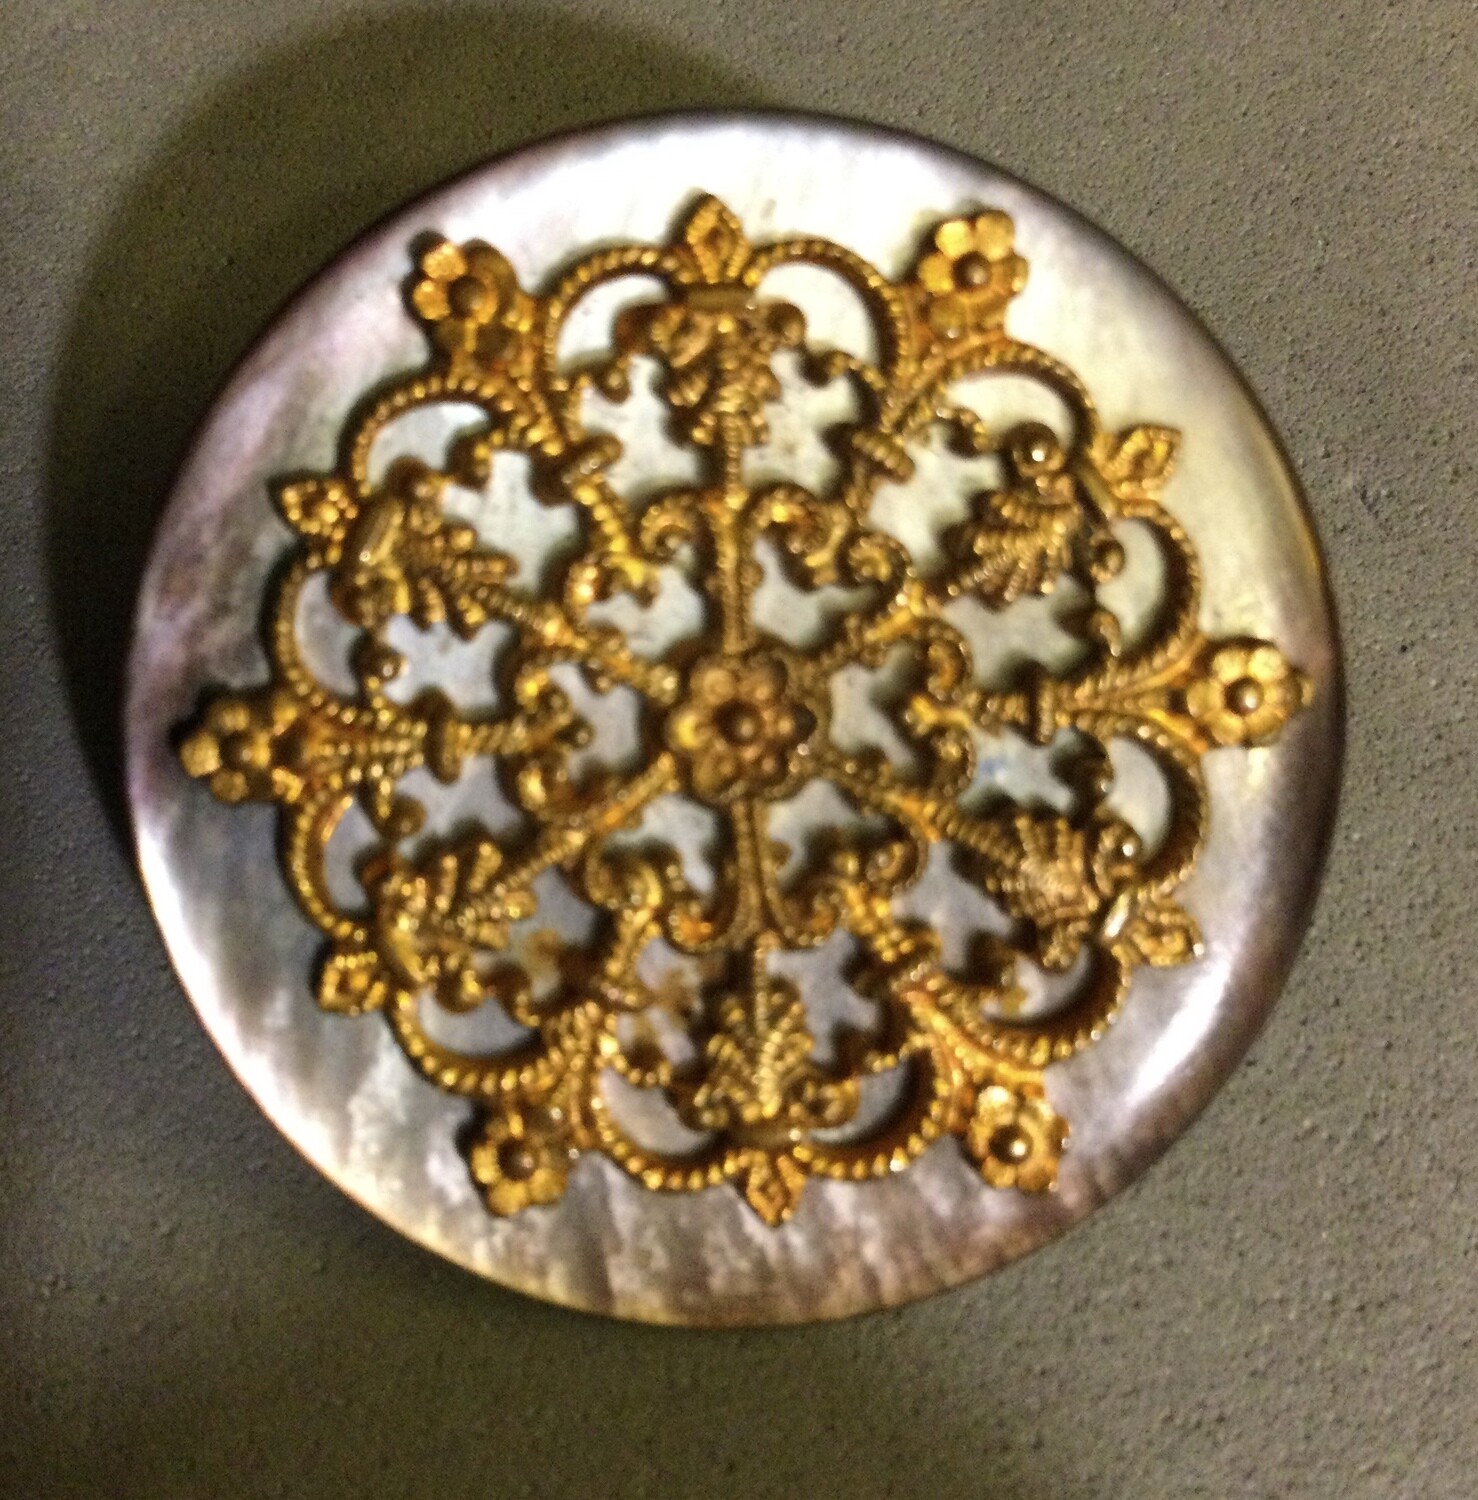 Smokey pearl topped with openwork gilt brass